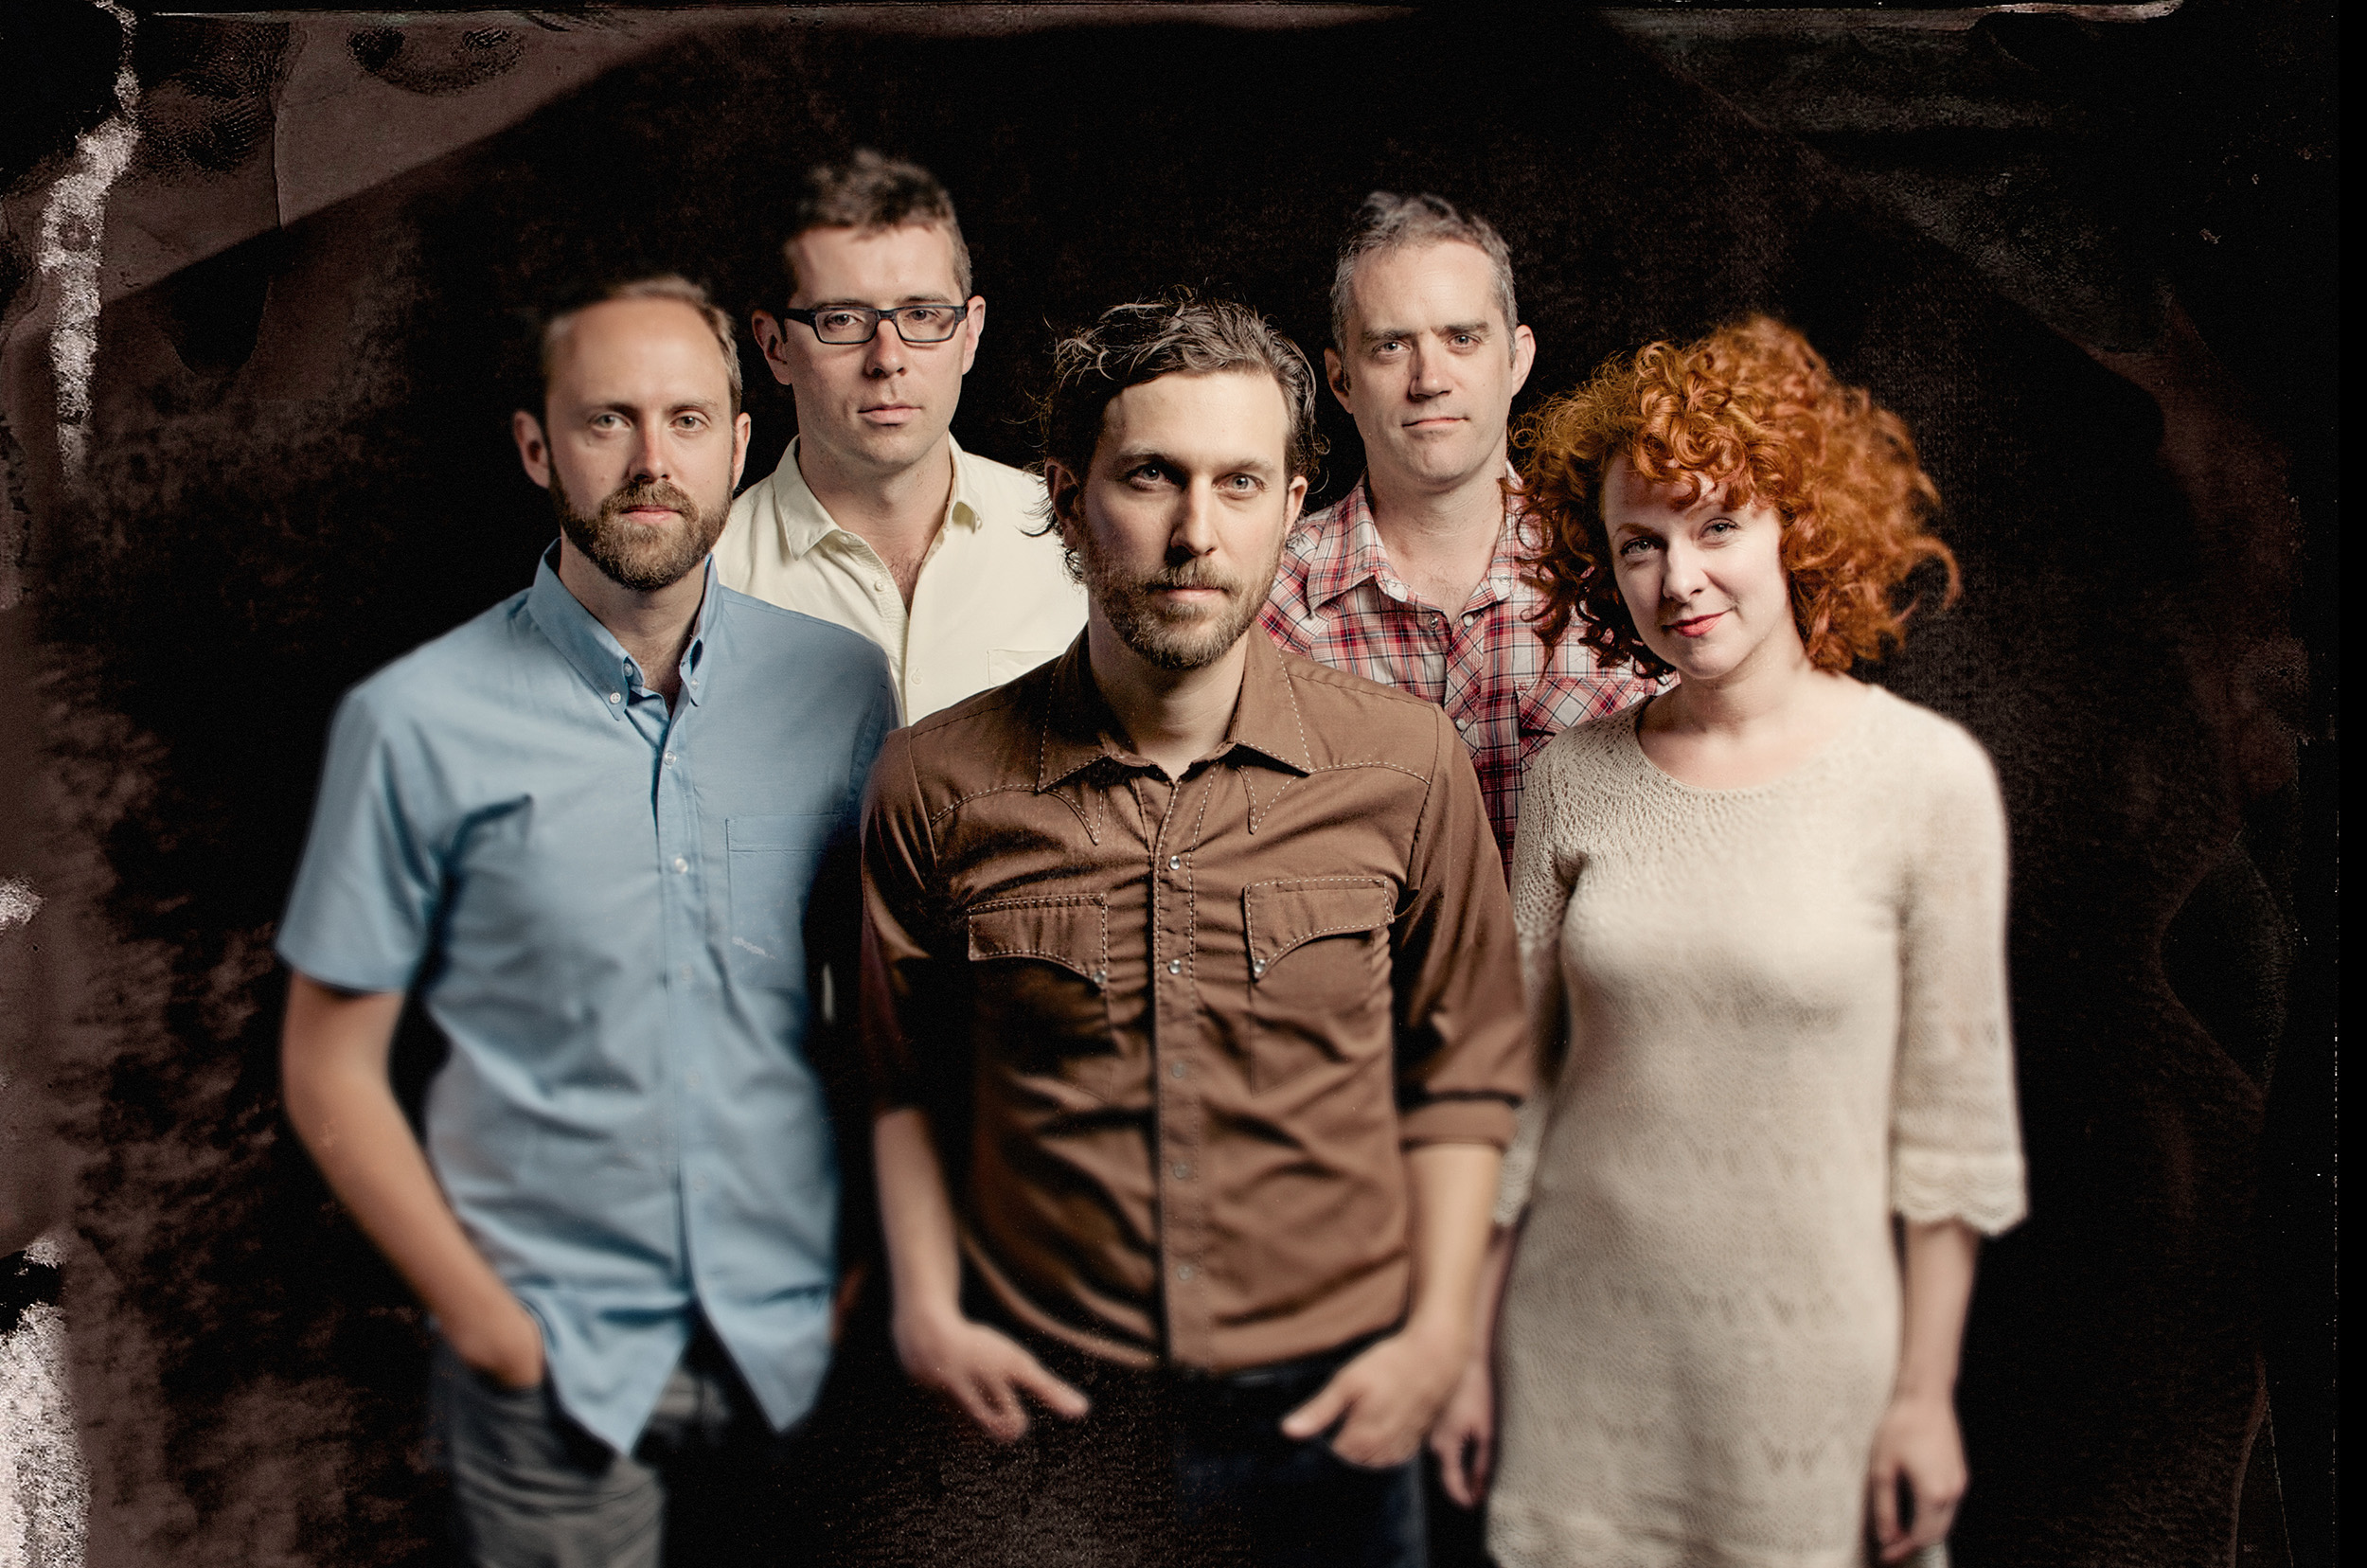 great lake swimmers tour